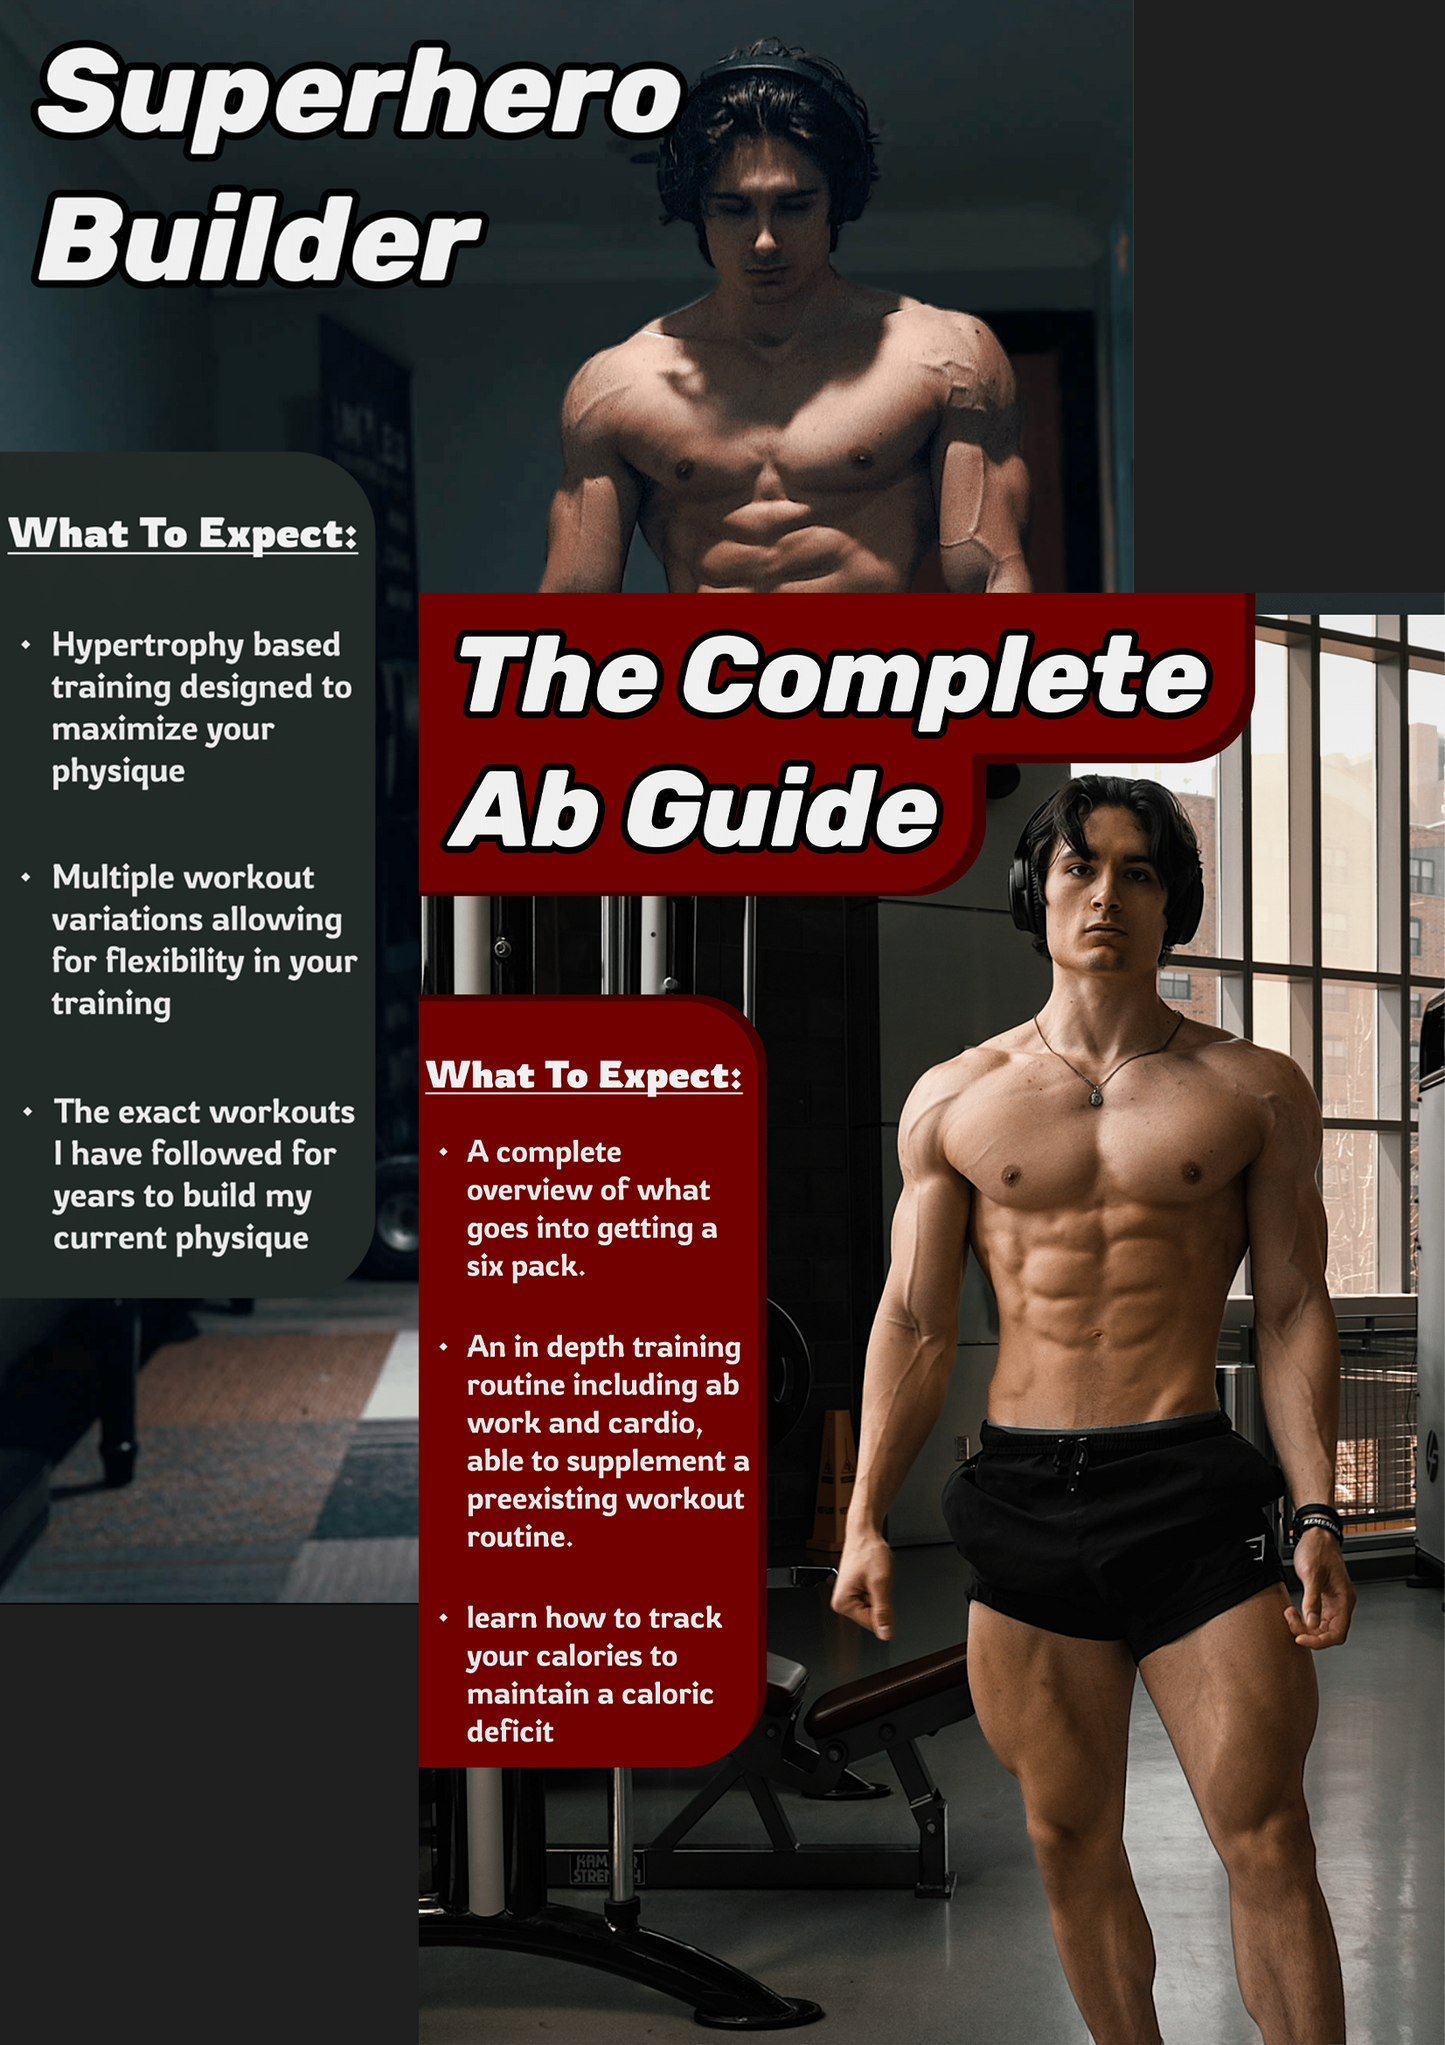 The Superhero Builder and Complete Ab Guide Bundle!